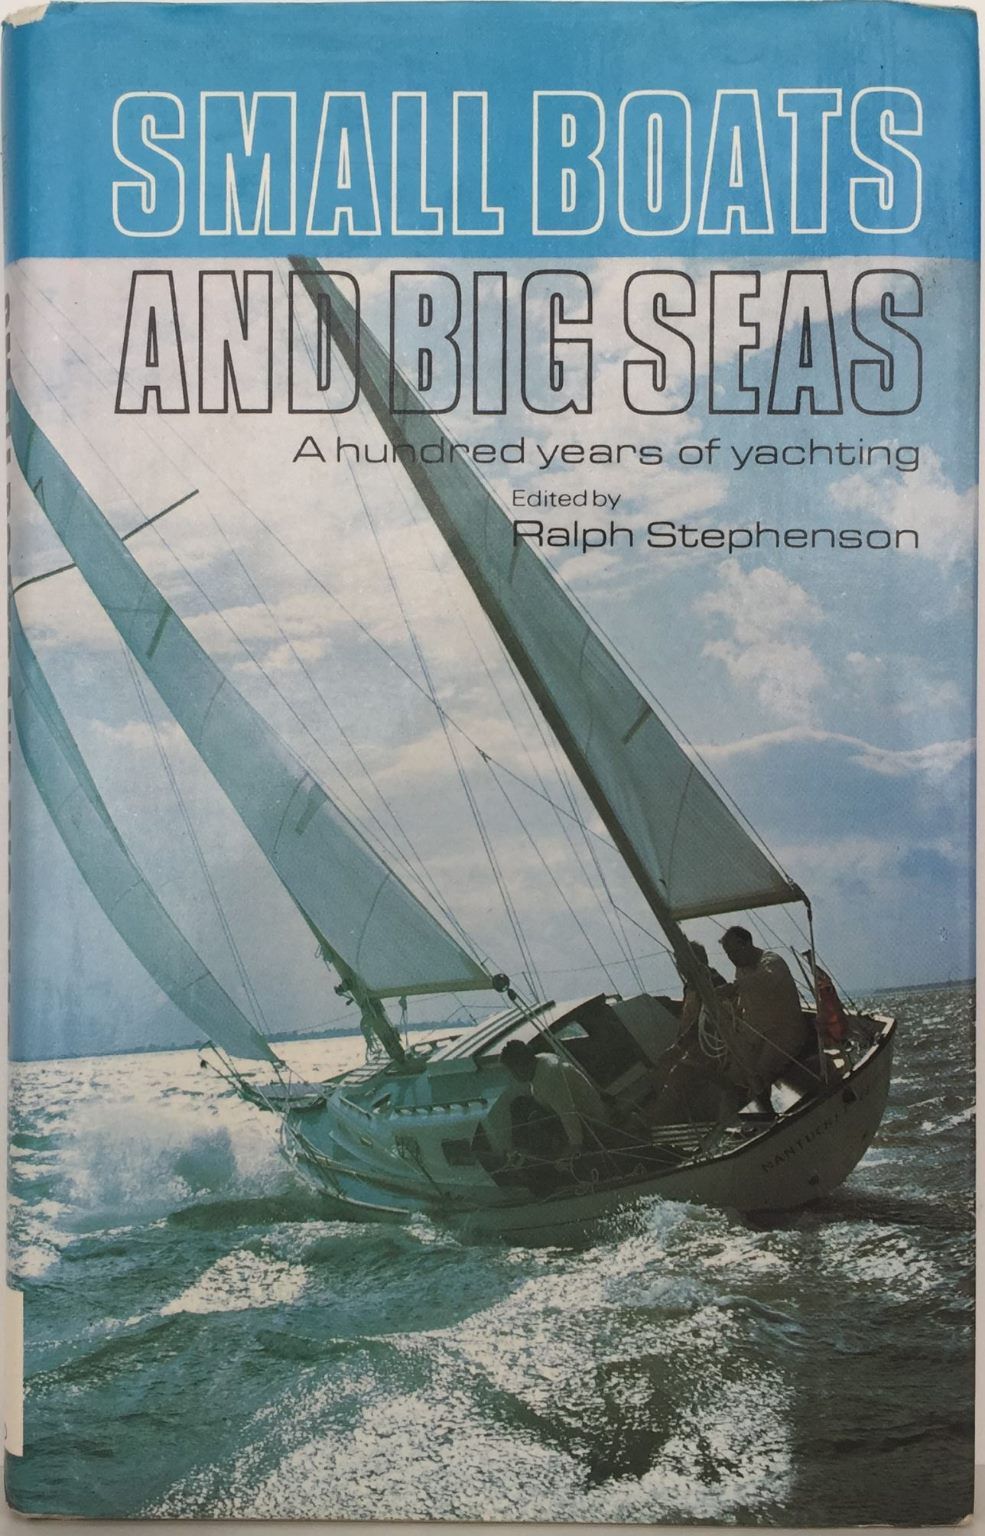 SMALL BOATS AND BIG SEAS: A Hundred Years of Yachting